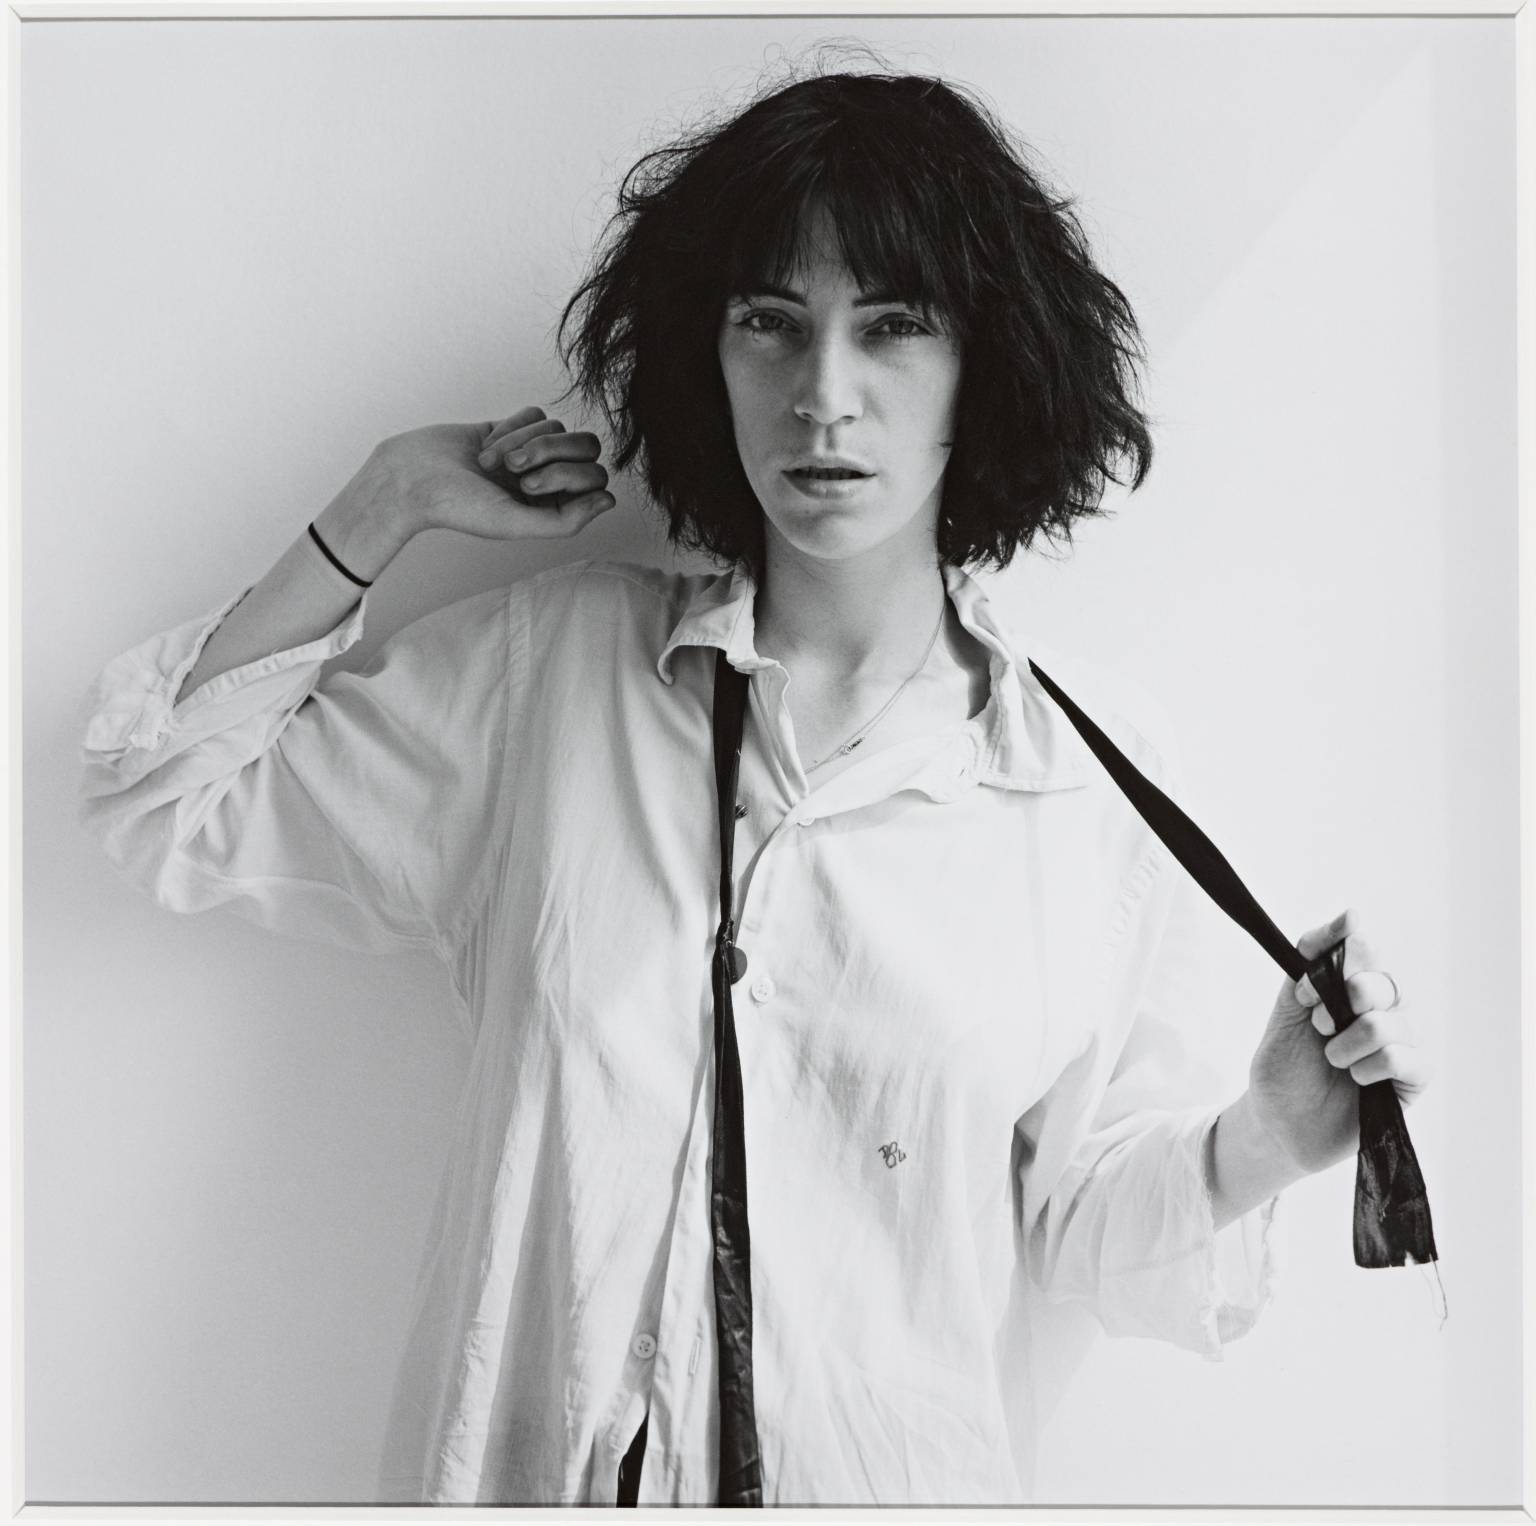 Patti Smith 1975 Robert Mapplethorpe 1946-1989 ARTIST ROOMS Acquired jointly with the National Galleries of Scotland through The d'Offay Donation with assistance from the National Heritage Memorial Fund and the Art Fund 2008 http://www.tate.org.uk/art/work/AR00185